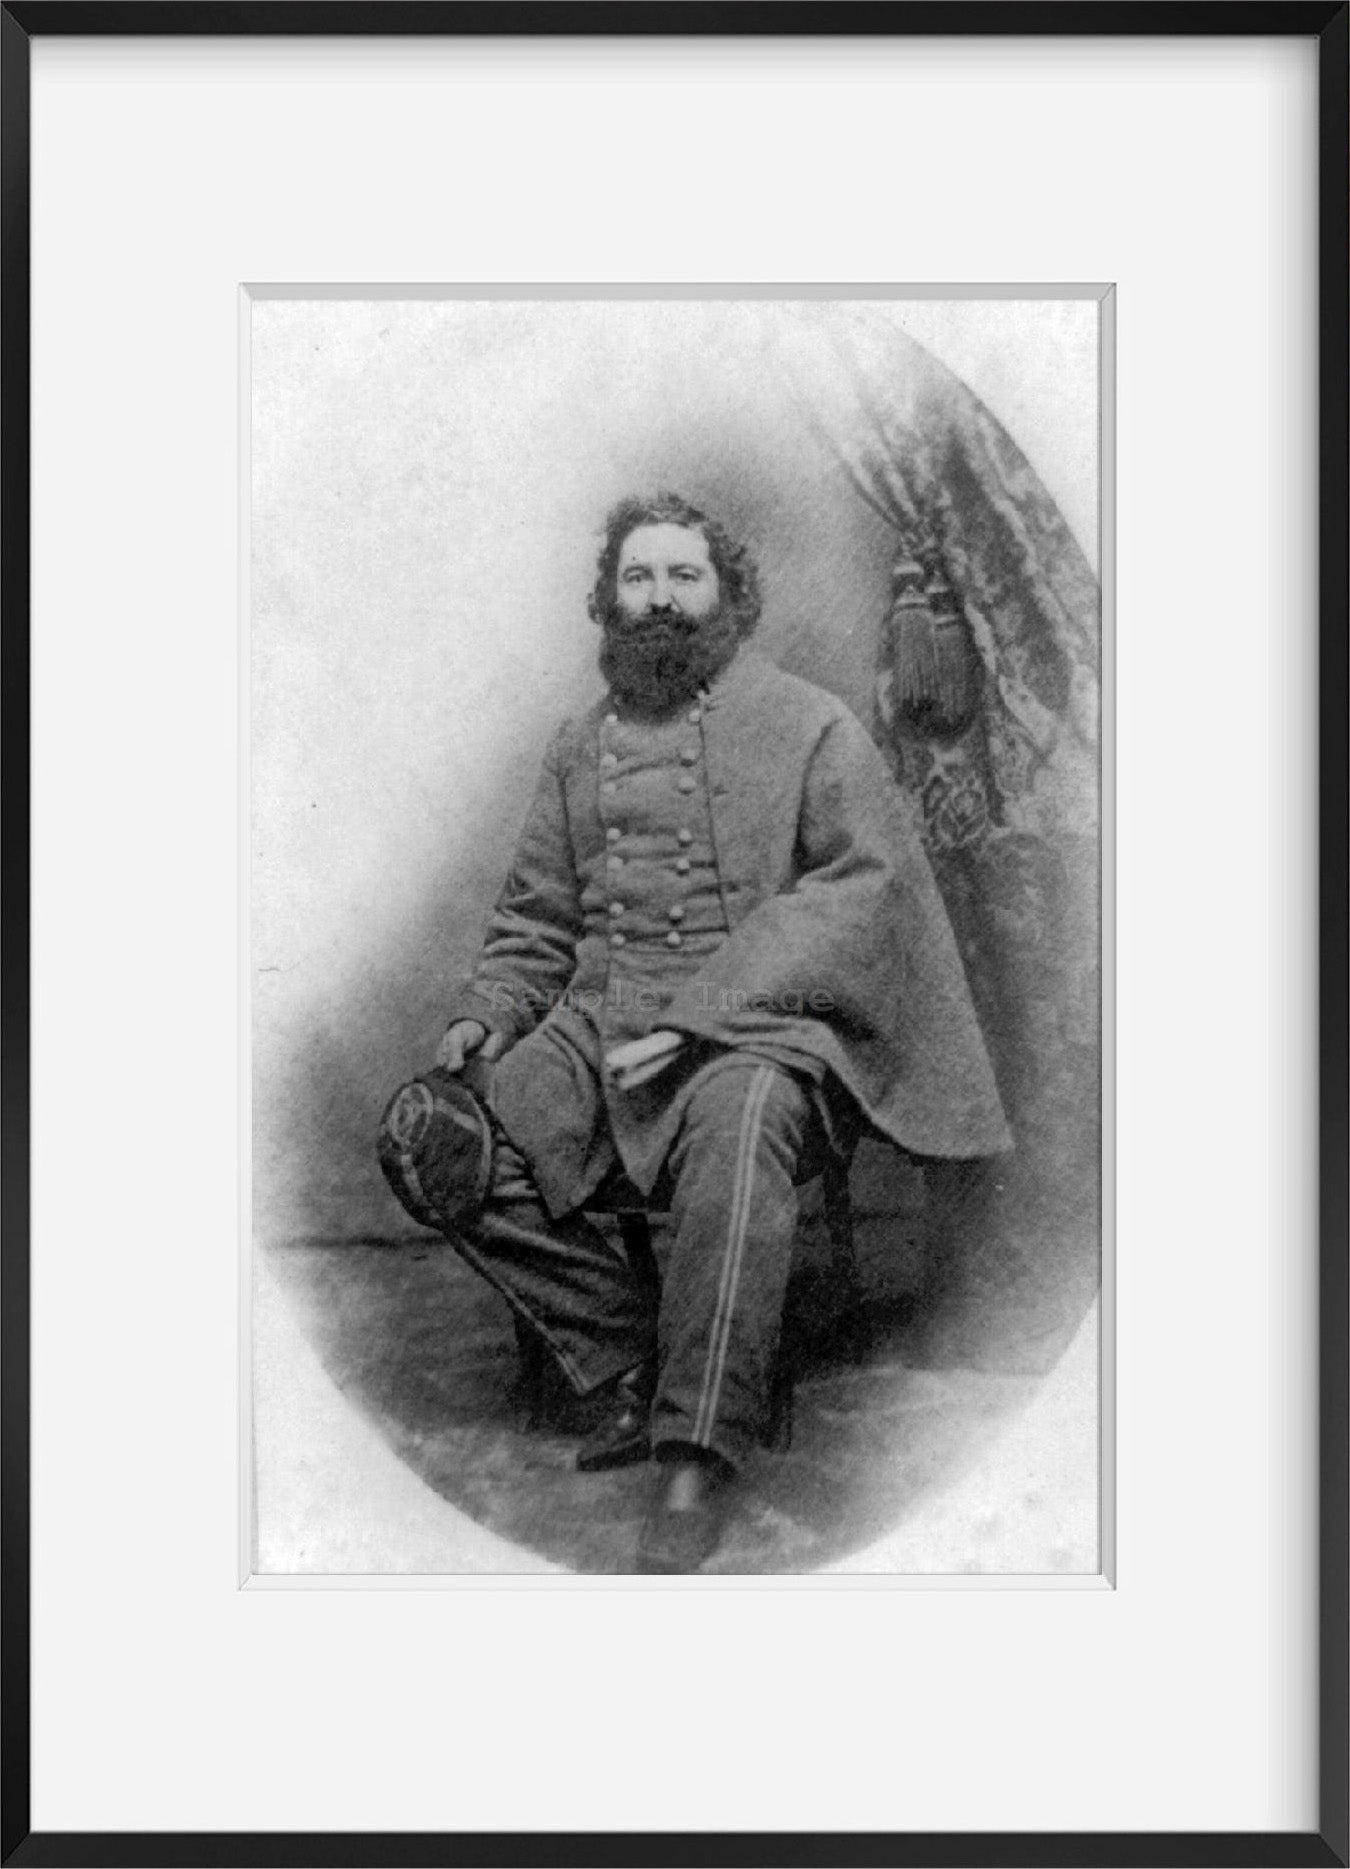 Photo: Major General Lafayette McLaws, 1821-1897, US Army Officer, Confederate Gene